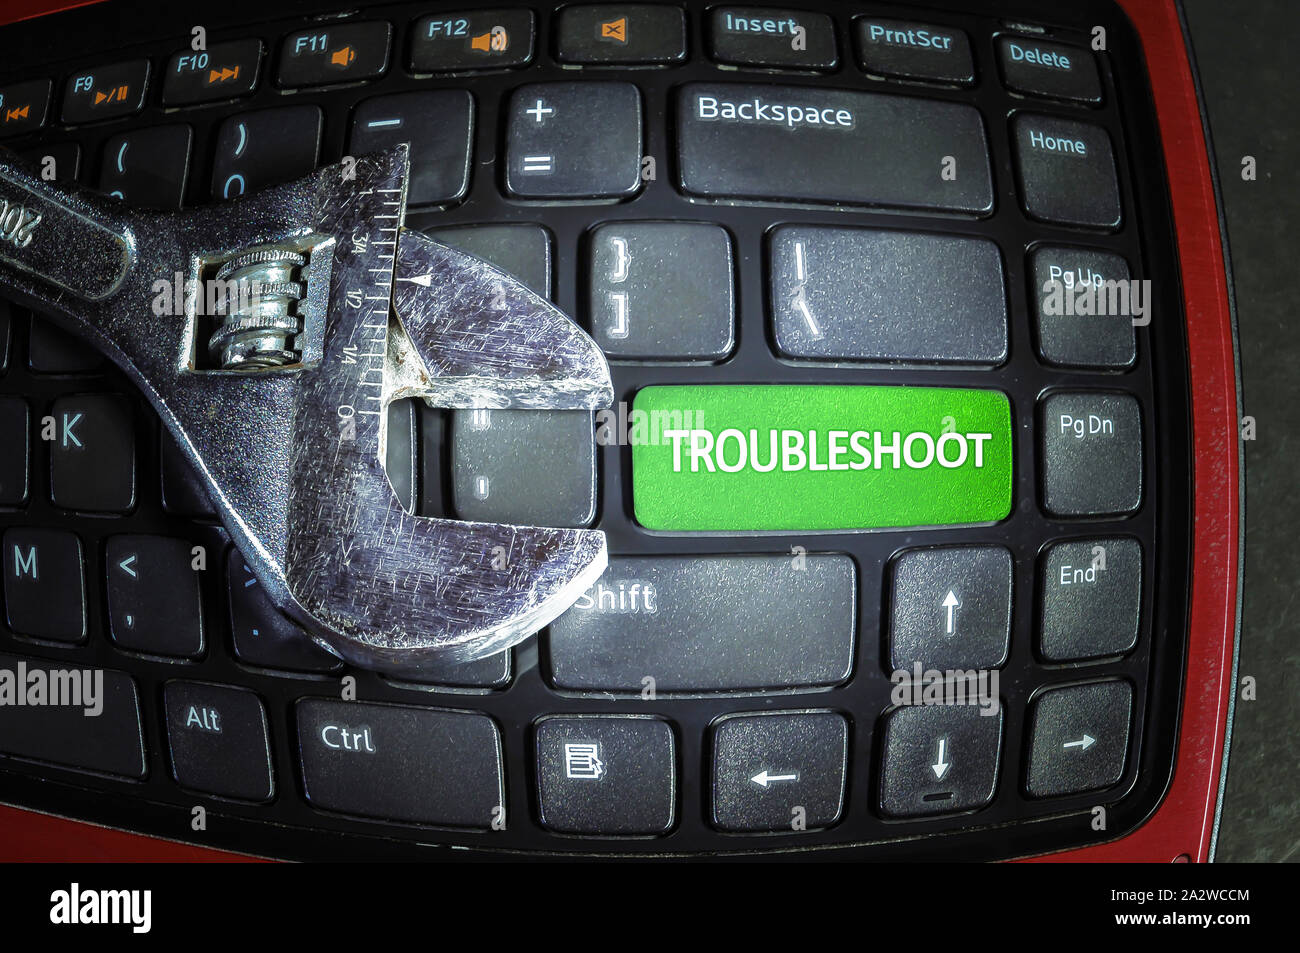 Fish eye effect. Troubleshoot green button on dirty computer keyboard with wrench tool. Stock Photo